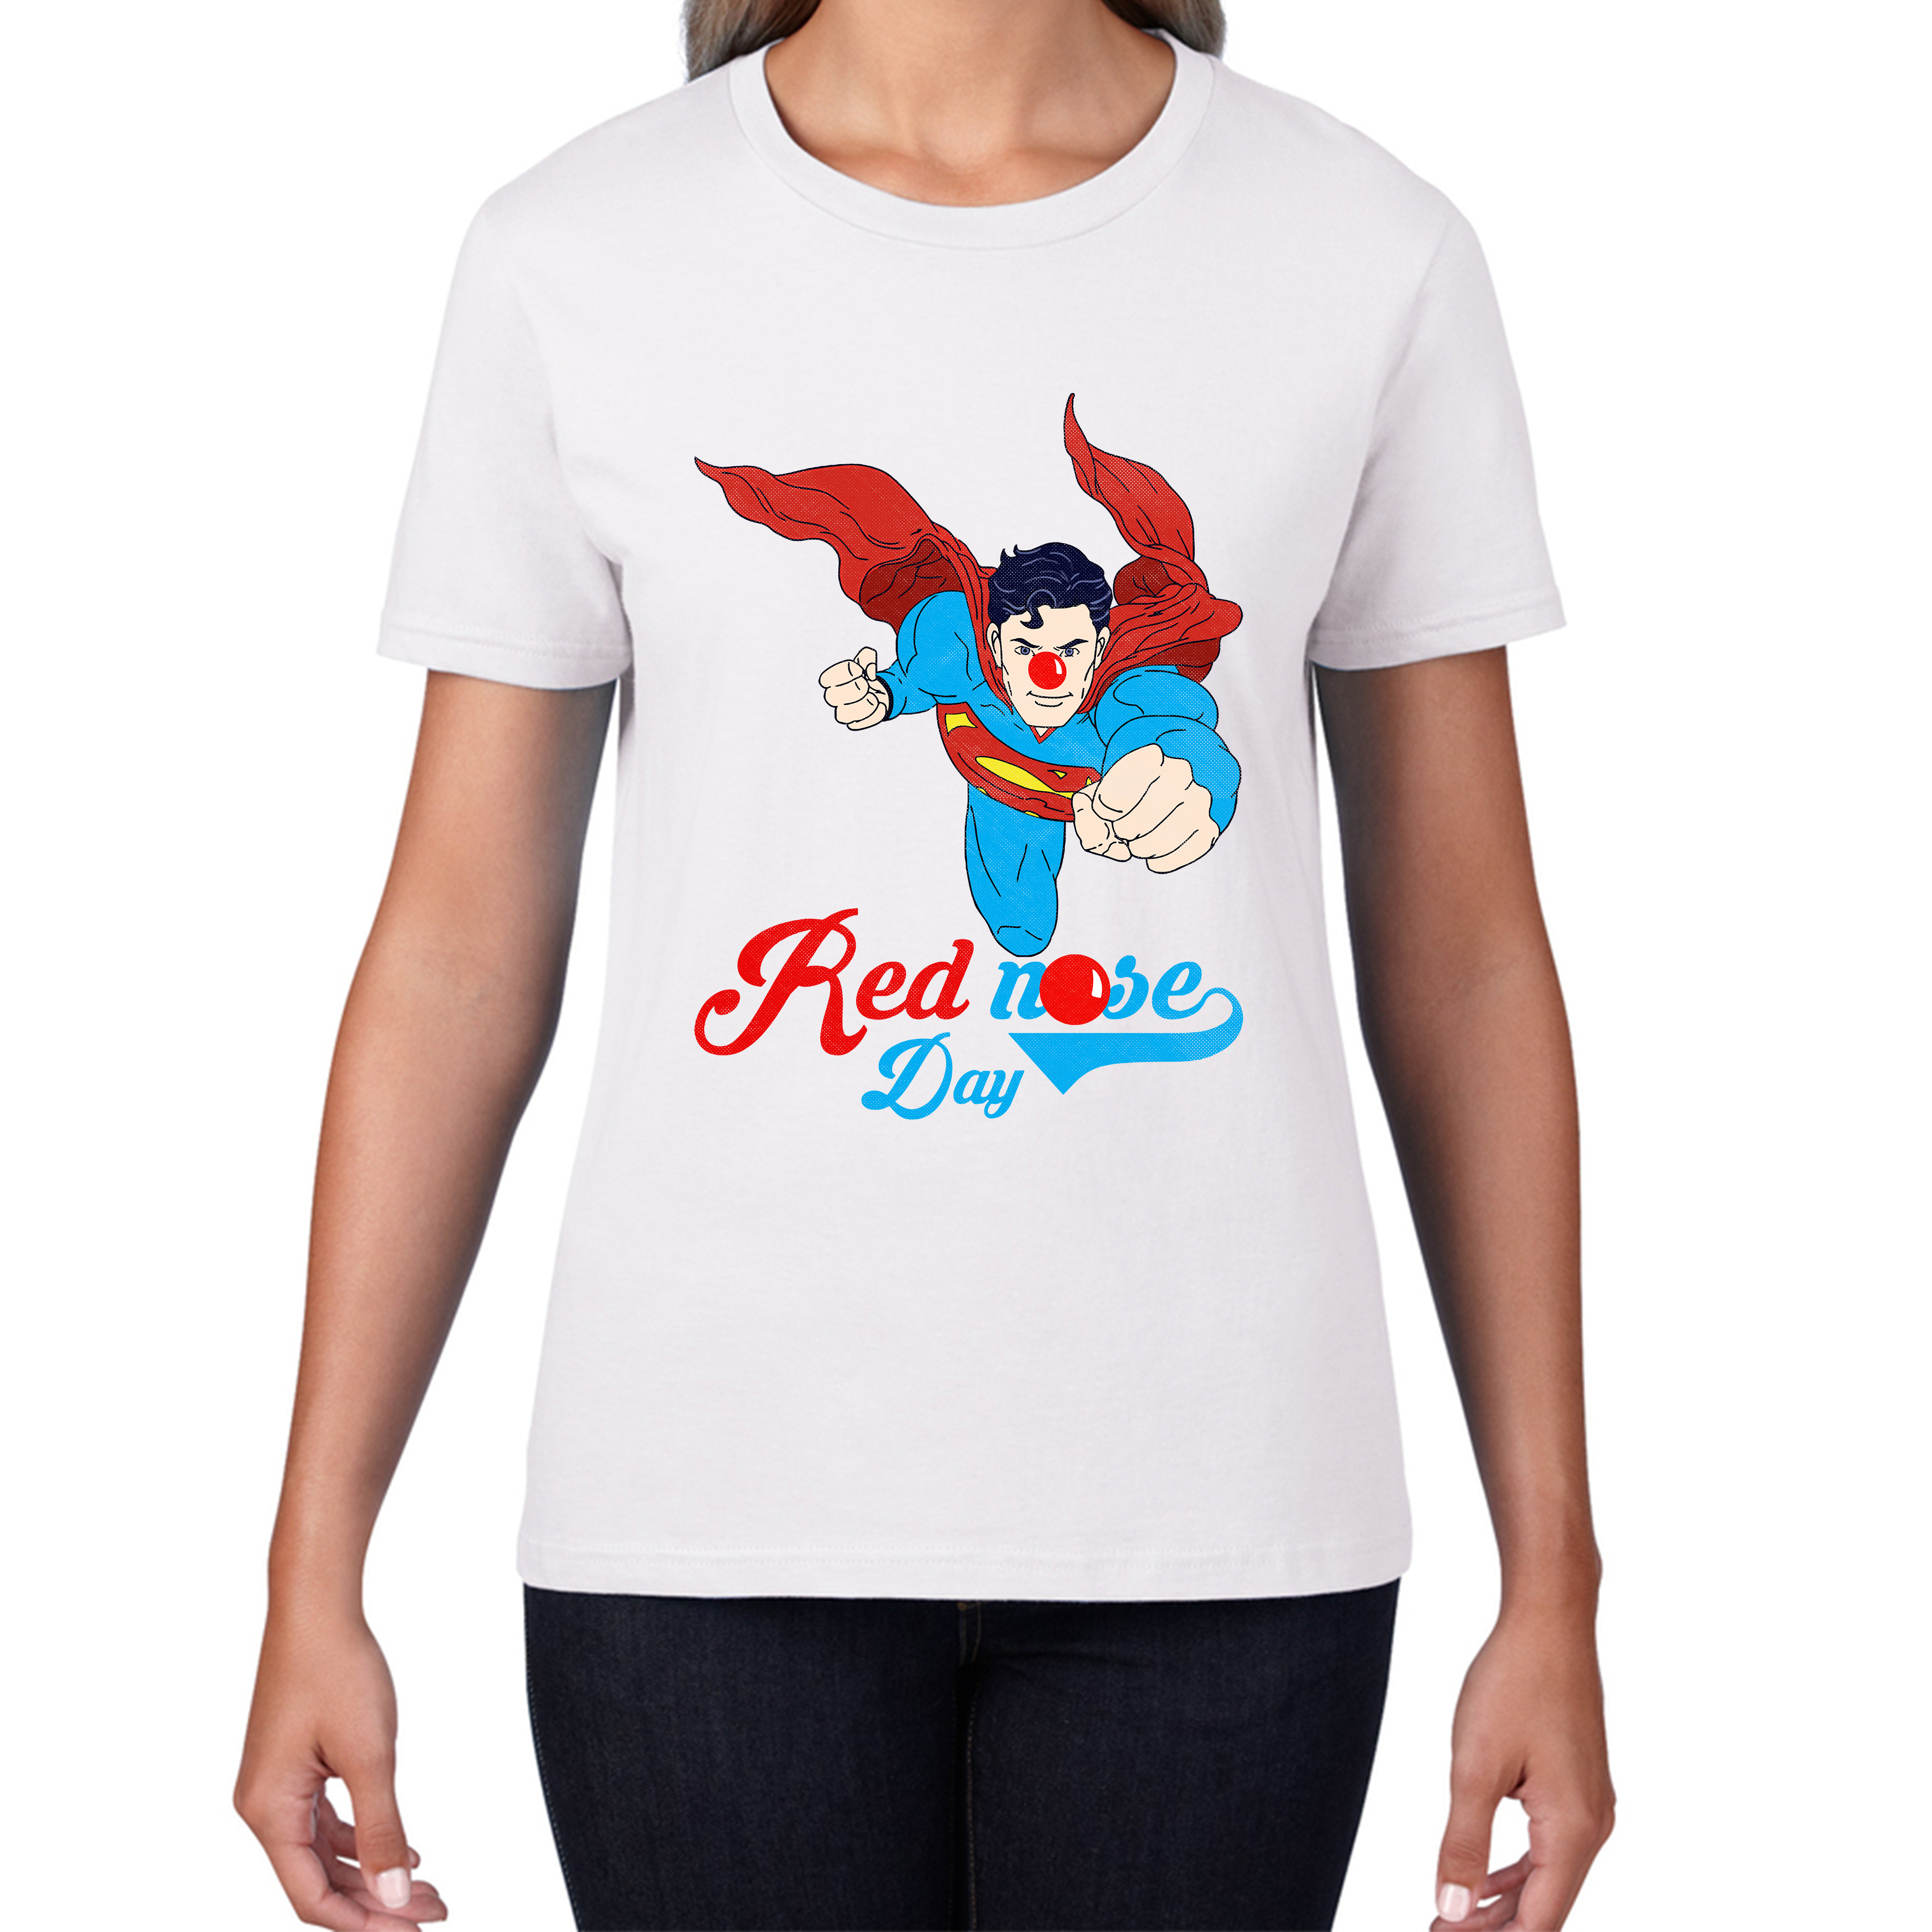 Flying Superman Red Nose Day Comic Superhero Ladies T Shirt. 50% Goes To Charity